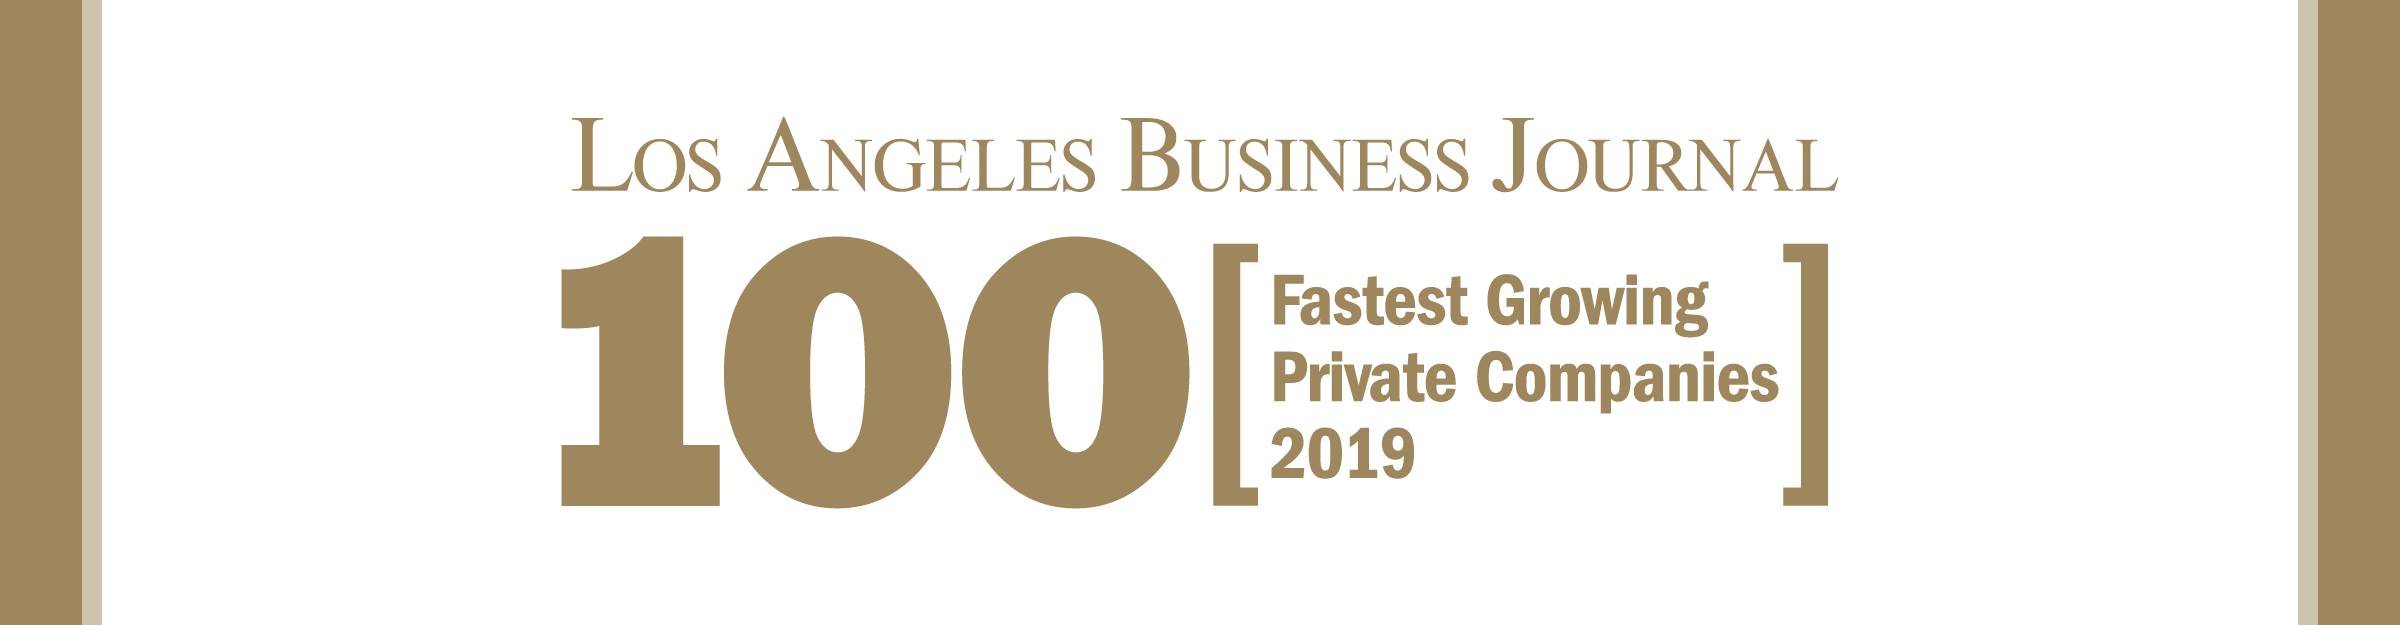 Los Angeles Business Journal 100 Fastest Growing Private Companies Event Banner